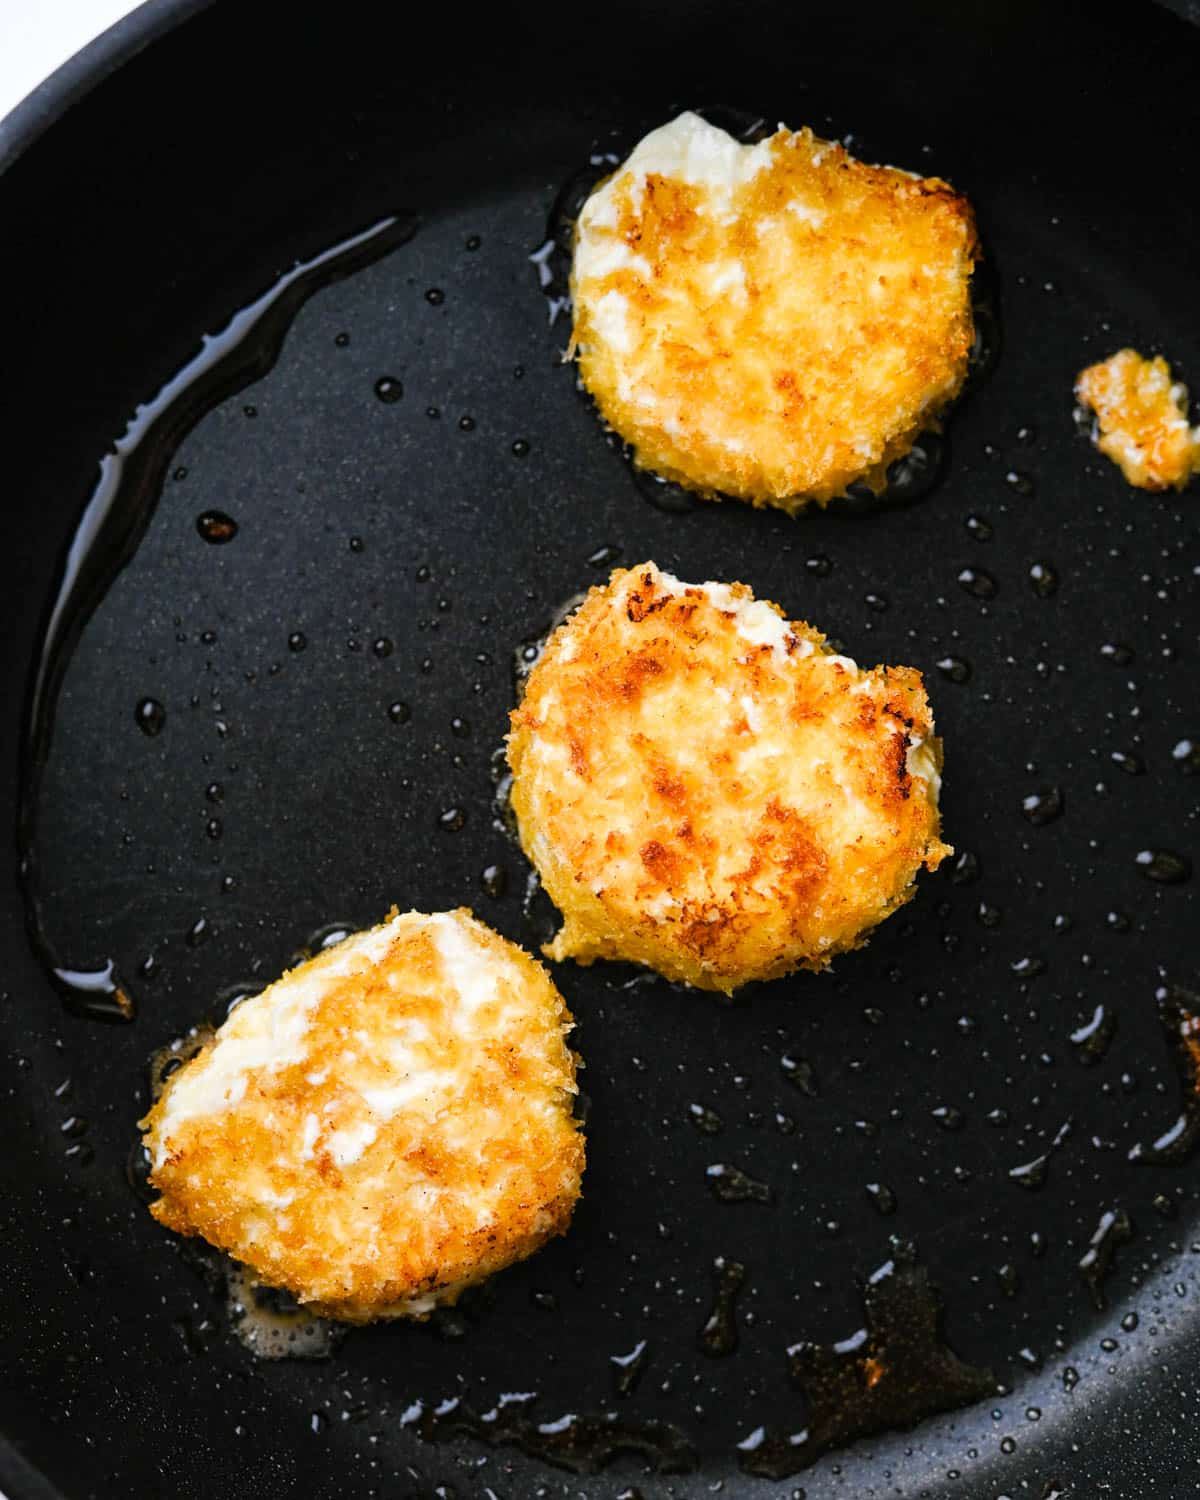 Frying goat cheese in a nonstick skillet until gold